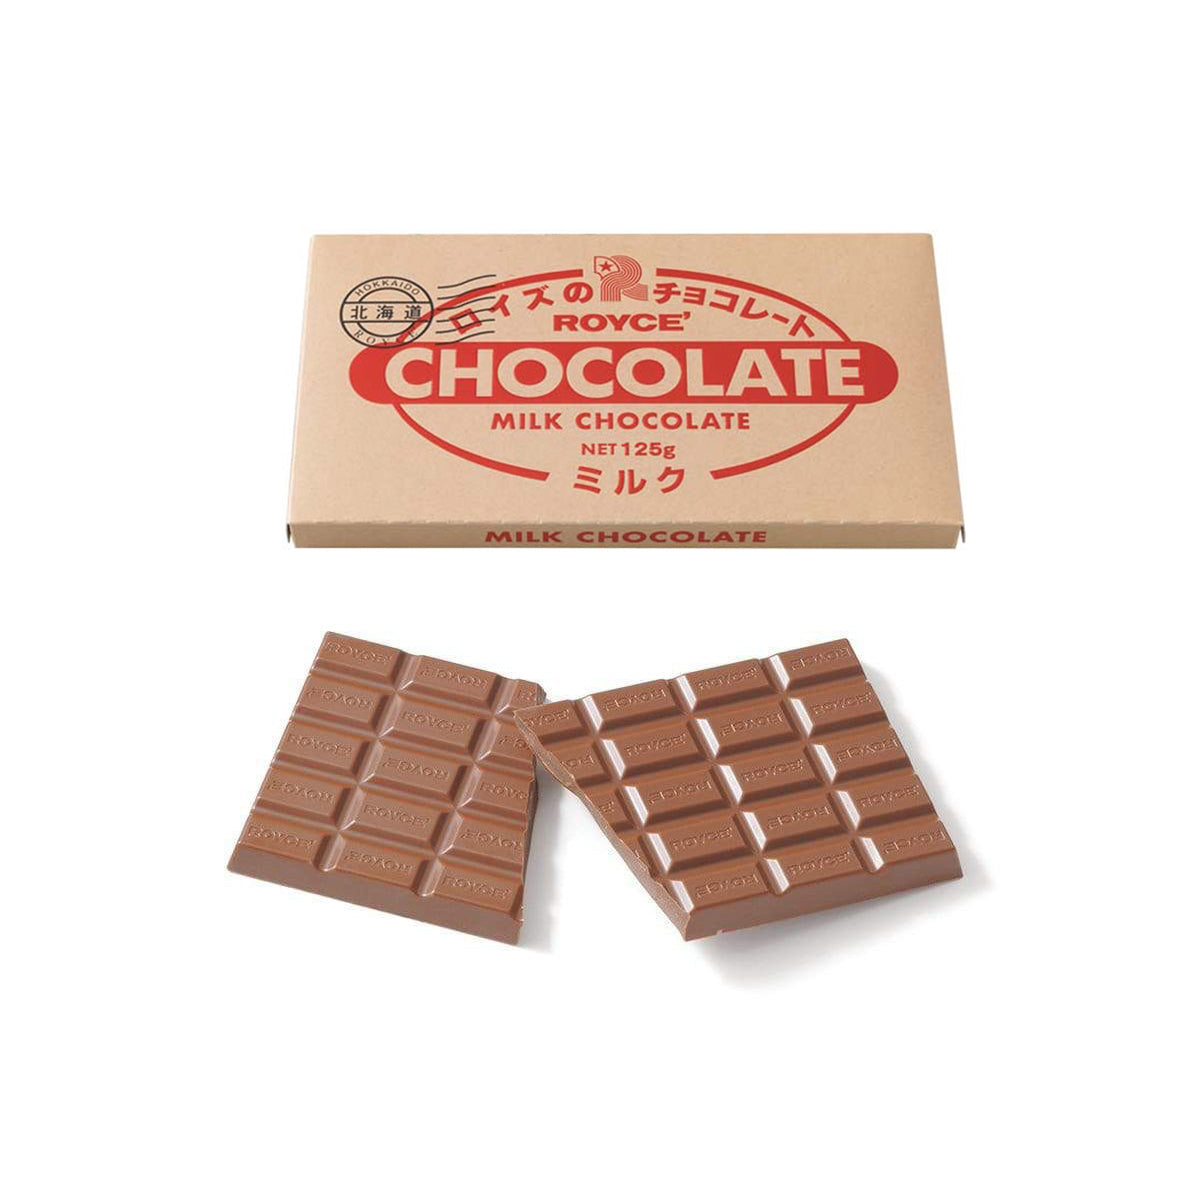 ROYCE' Chocolate - Chocolate Bar "Milk" - Image shows a chocolate carton. Text in black says Hokkaido ROYCE'. Text in red says ROYCE' Chocolate Milk Chocolate Net 125g. Text on bottom part says Milk Chocolate. Image below shows brown chocolate bars and the word "ROYCE'" engraved.